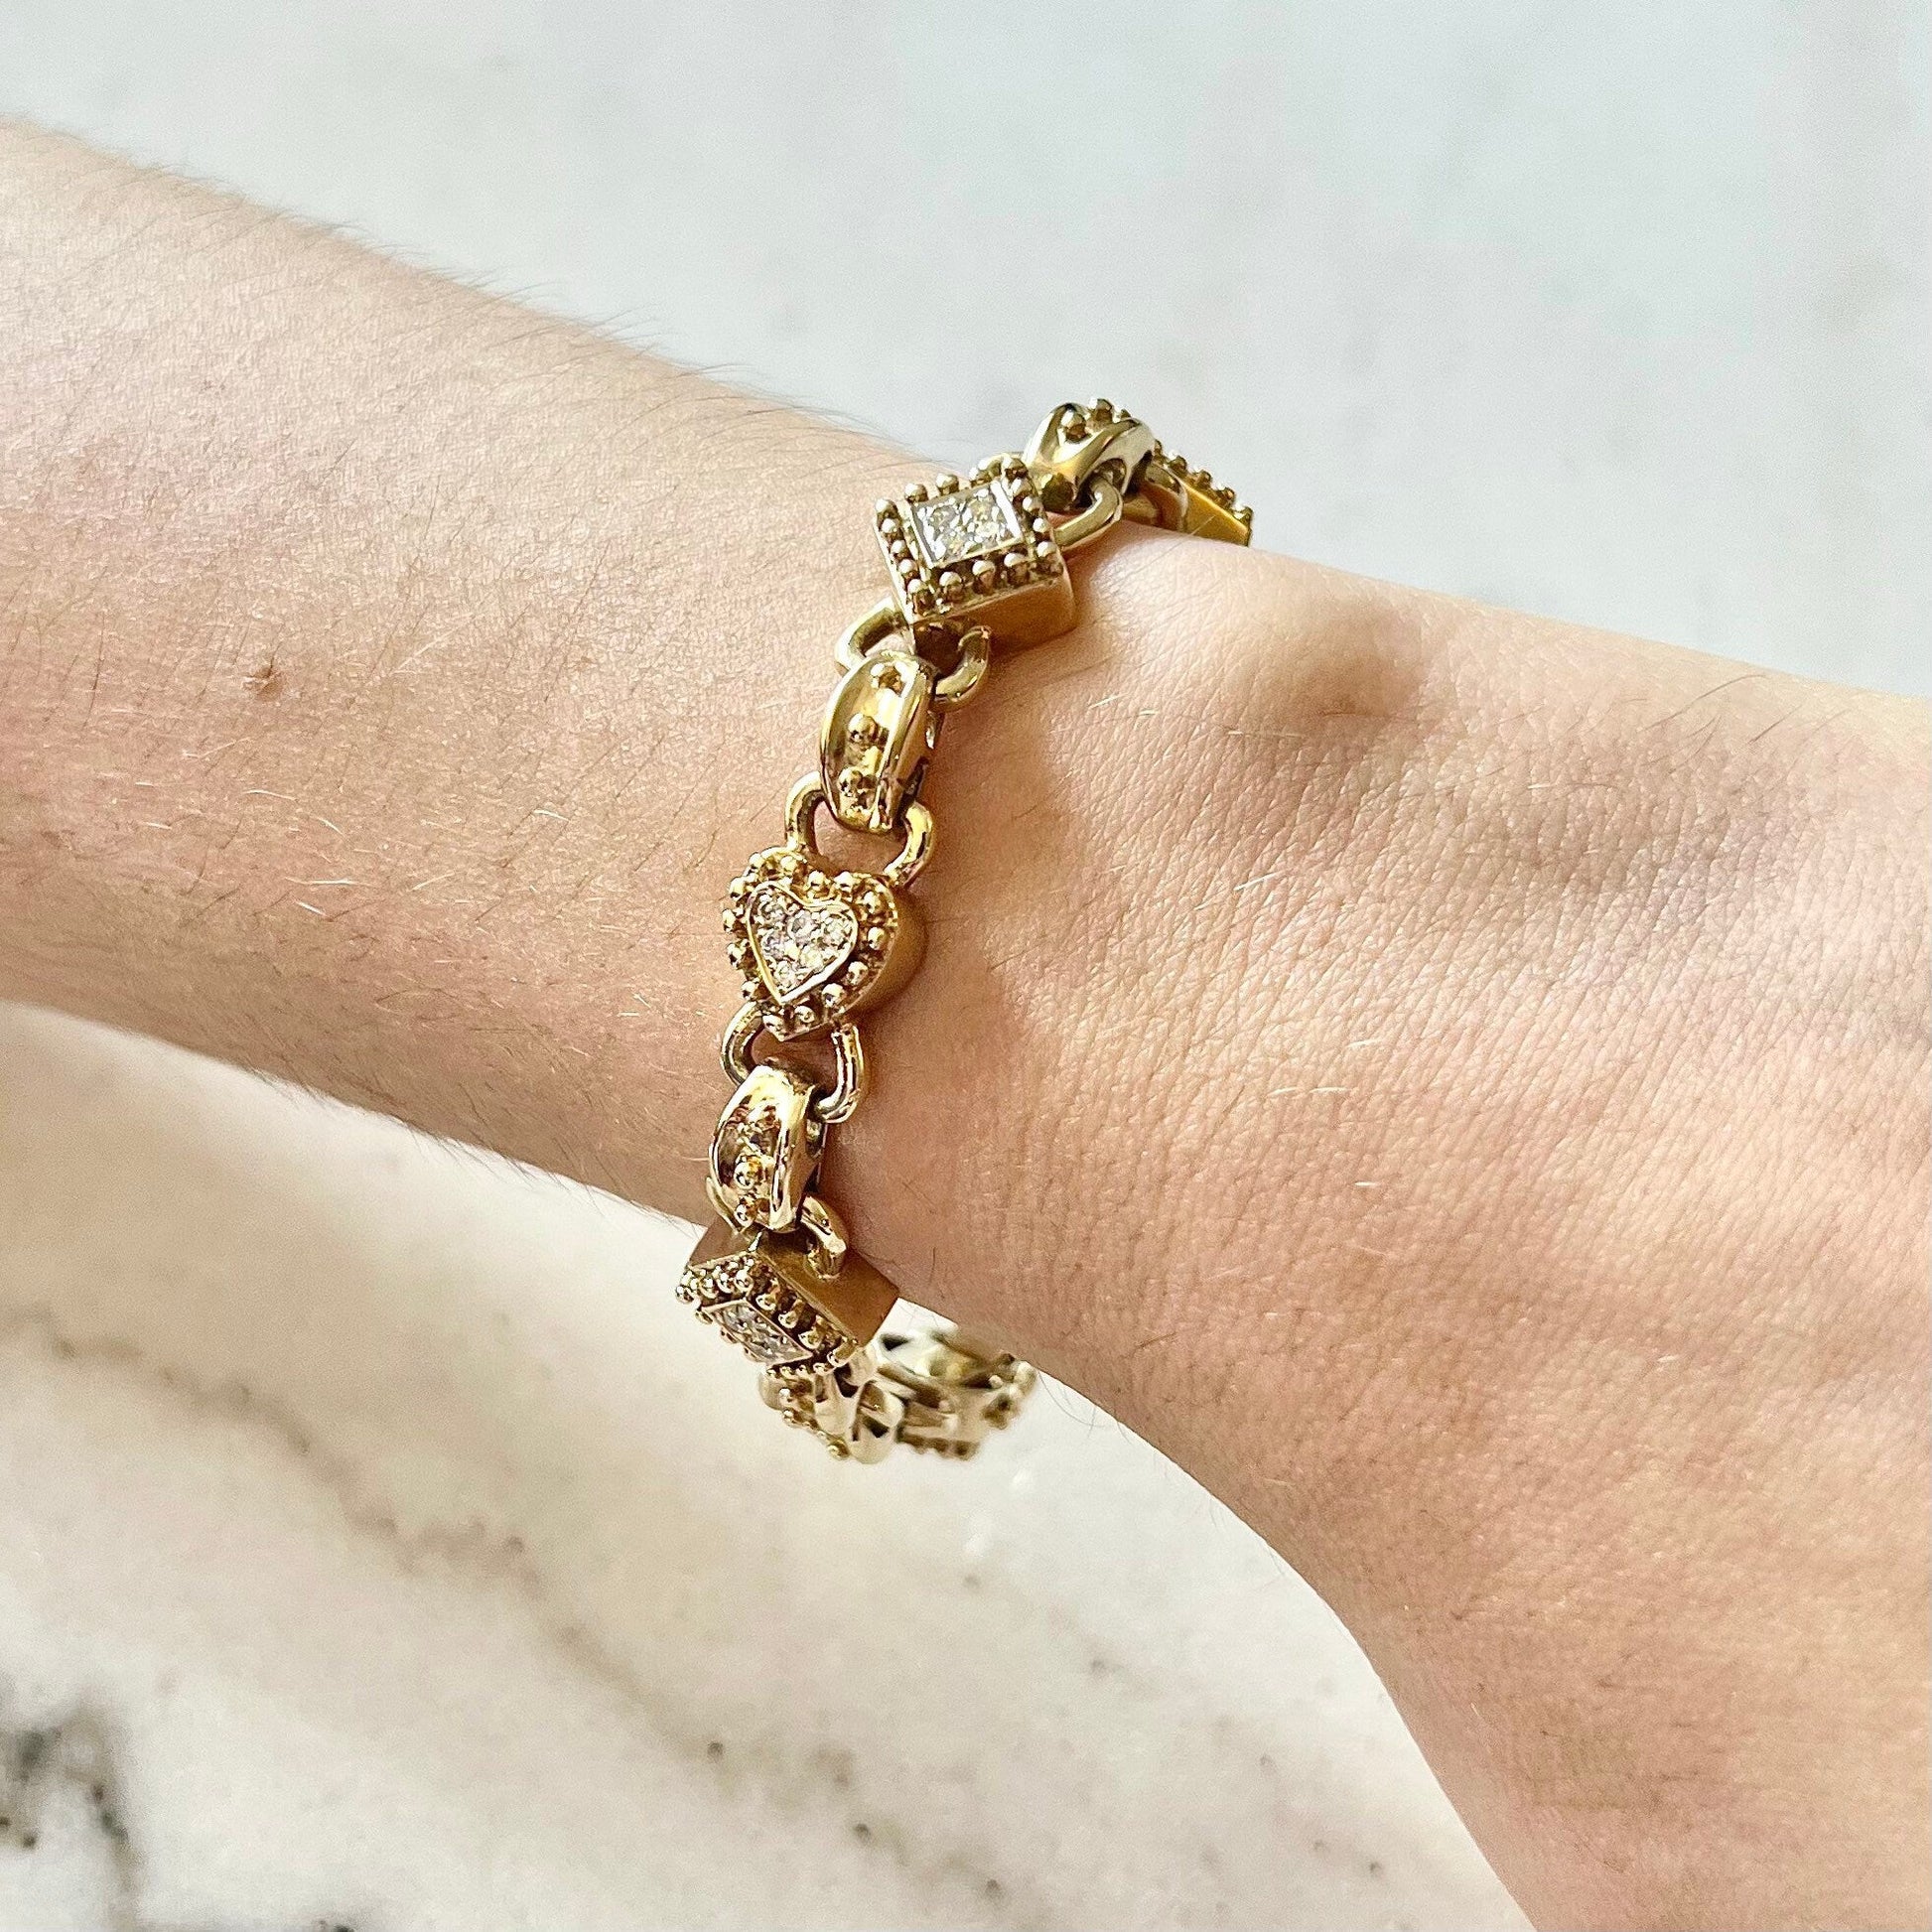 Vintage 14K Heart Diamond Bracelet - Yellow Gold Link Bracelet - Love Bracelet - Heart Bracelet - Valentine’s Day Gift - Best Gifts For Her